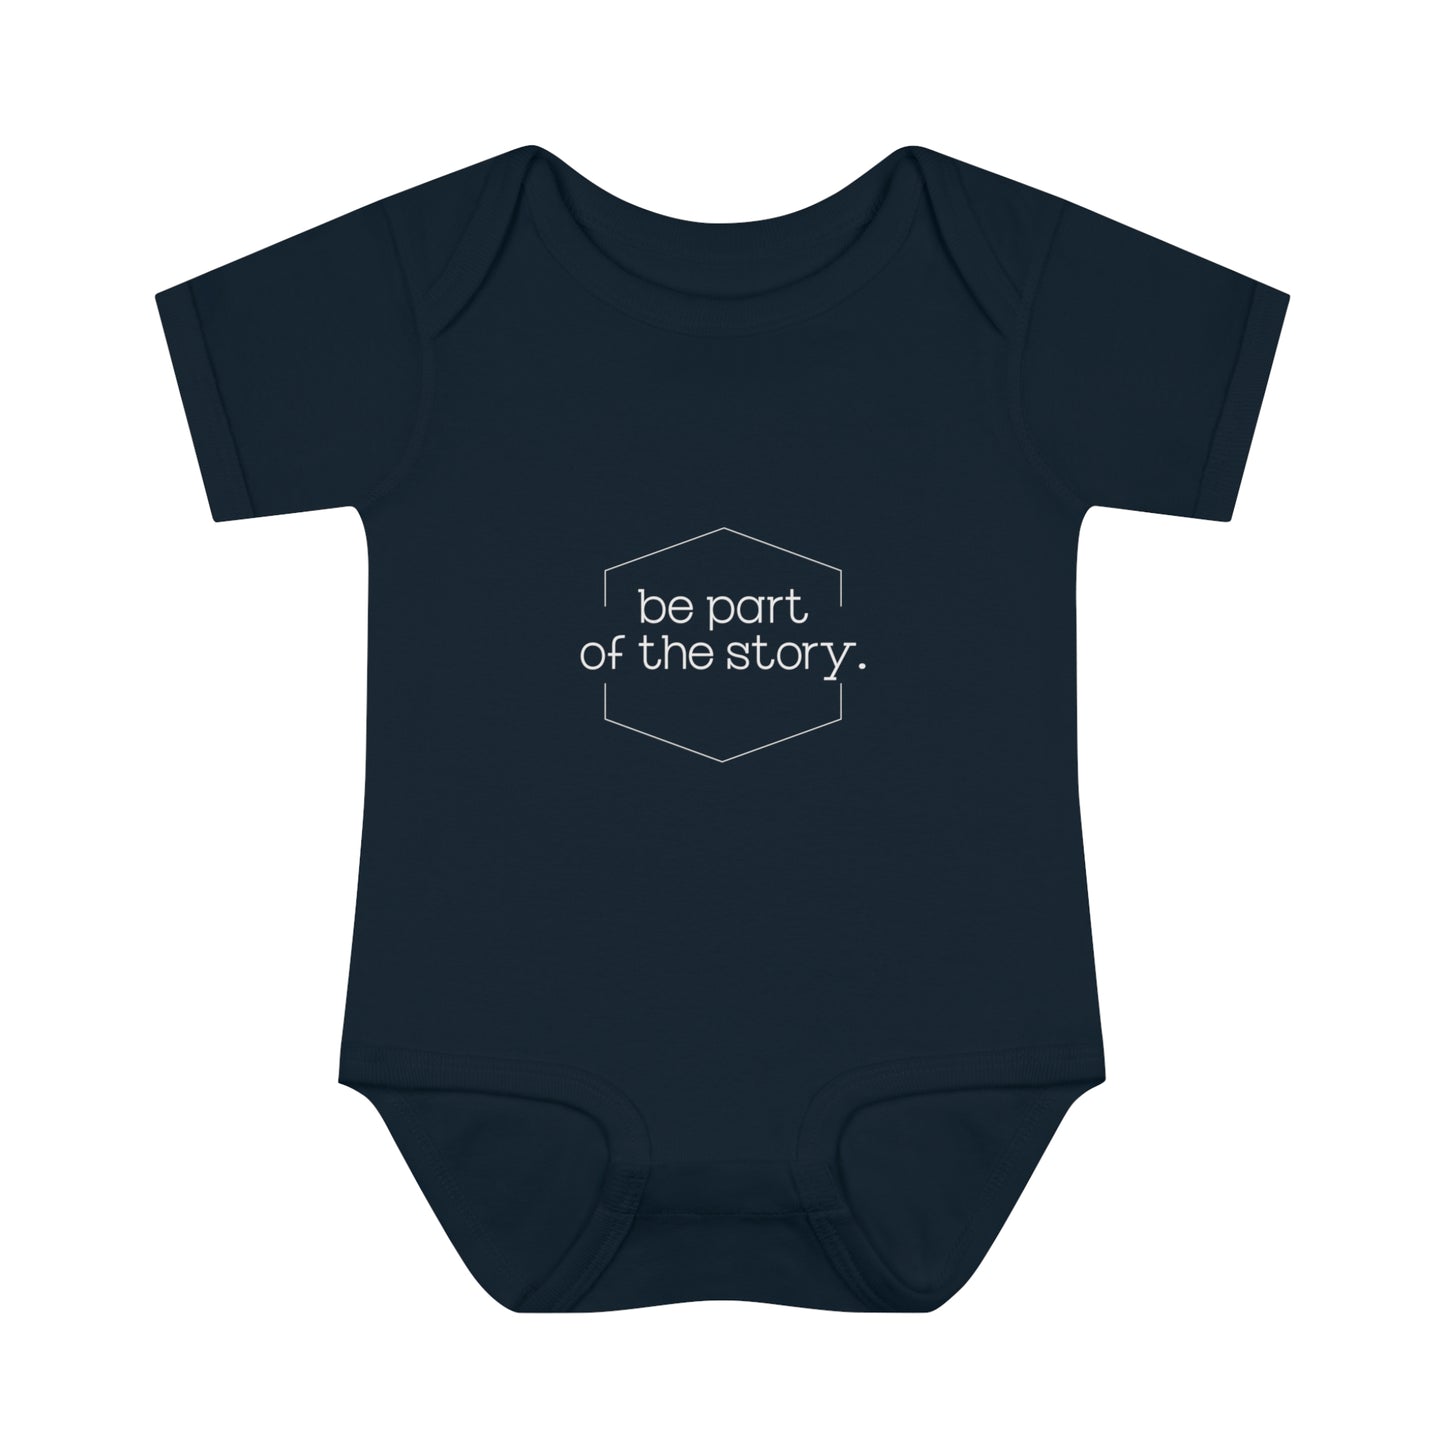 Be Part of the Story English Infant Baby Rib Bodysuit